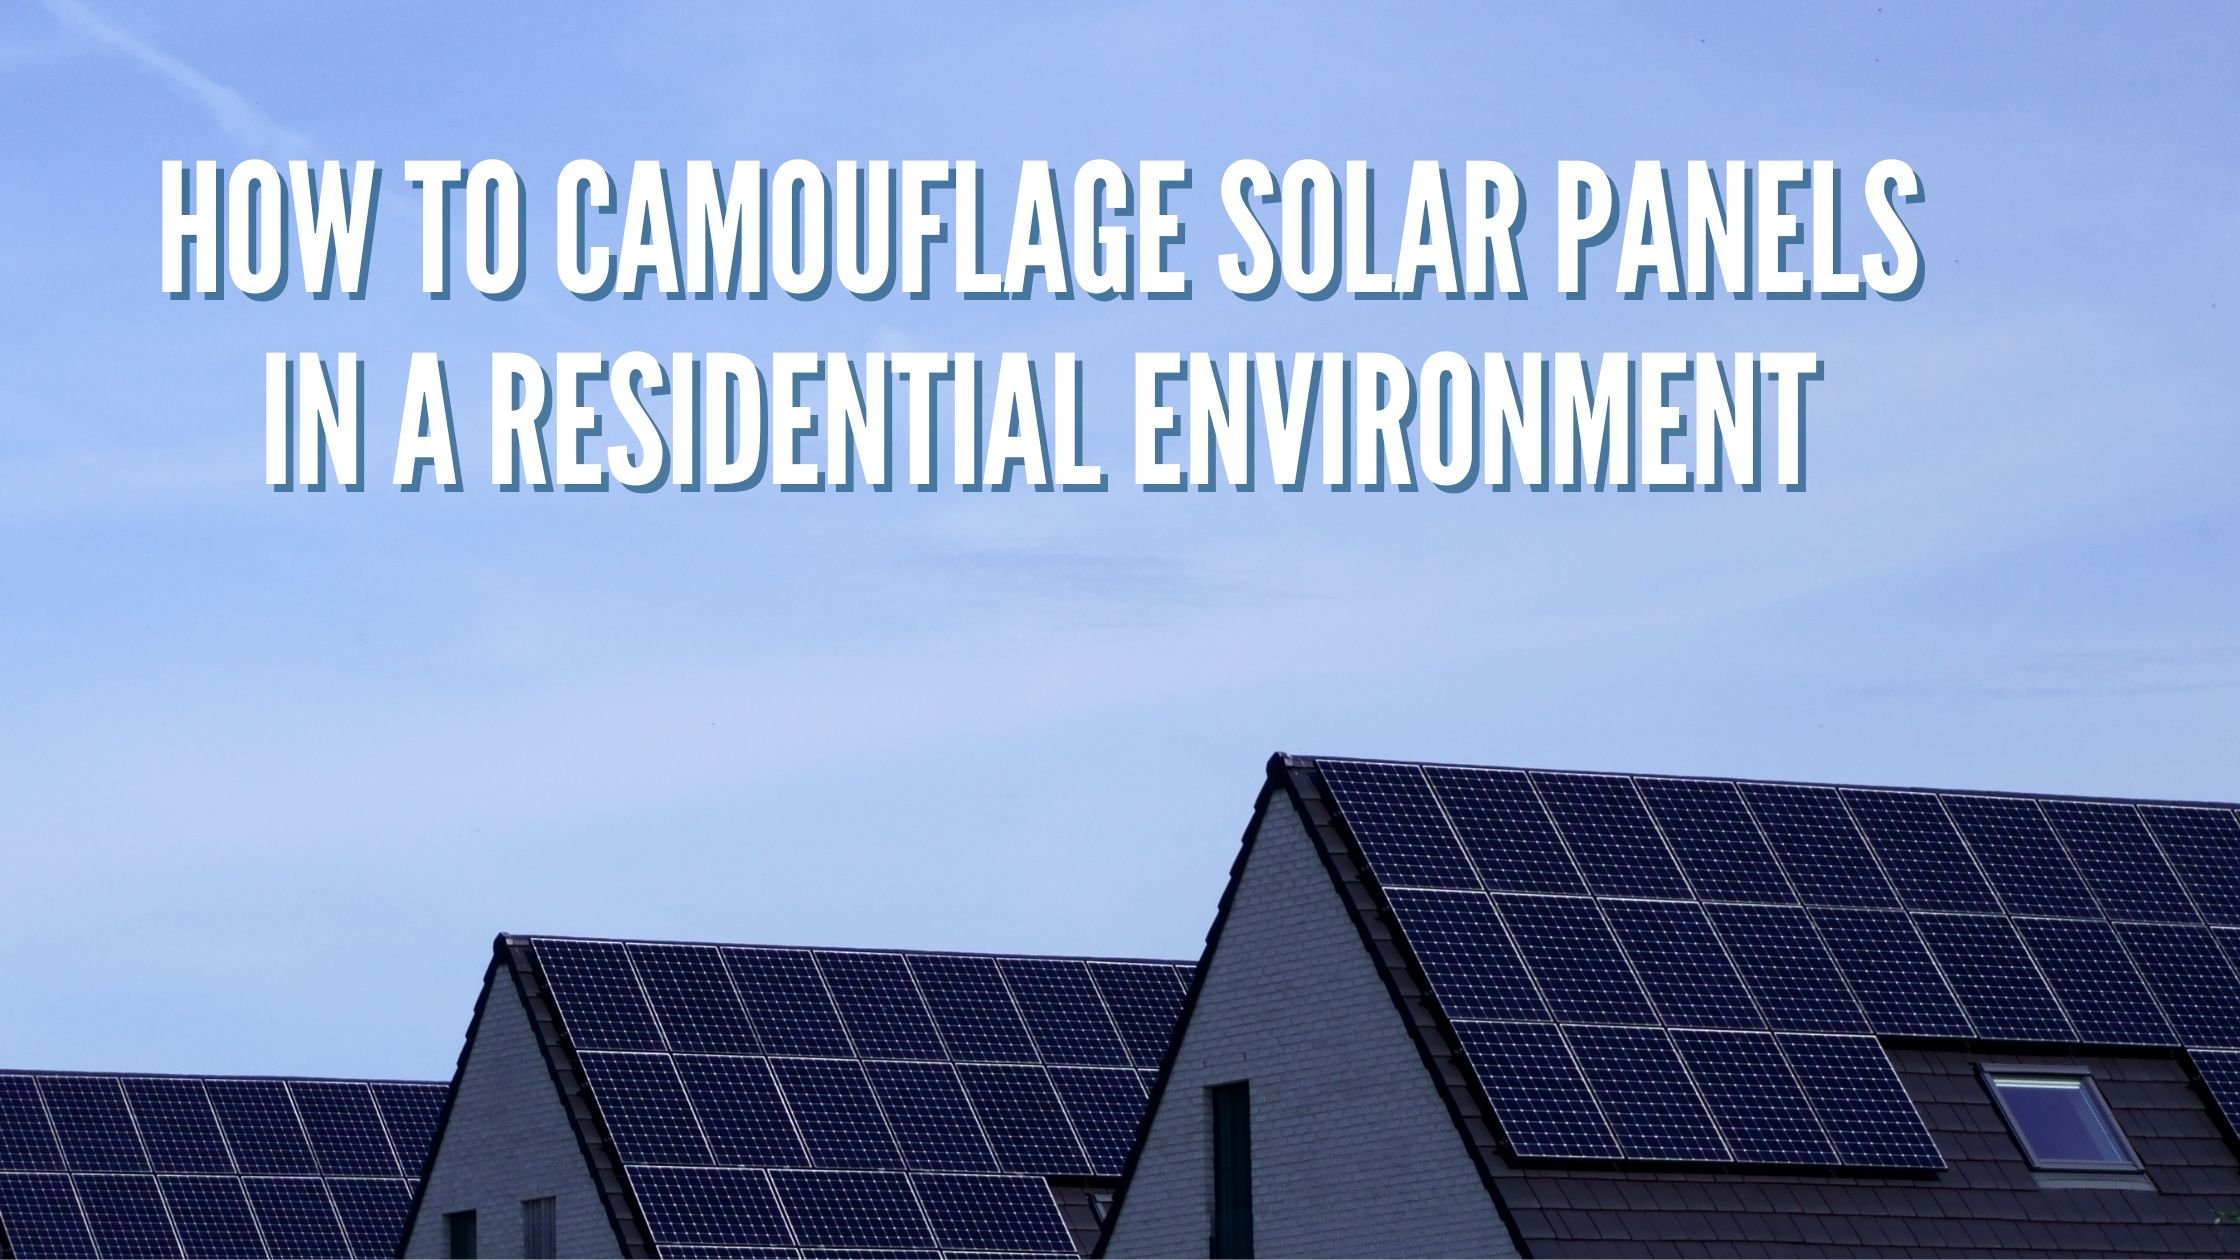 How to Camouflage Solar Panels in a Residential Environment